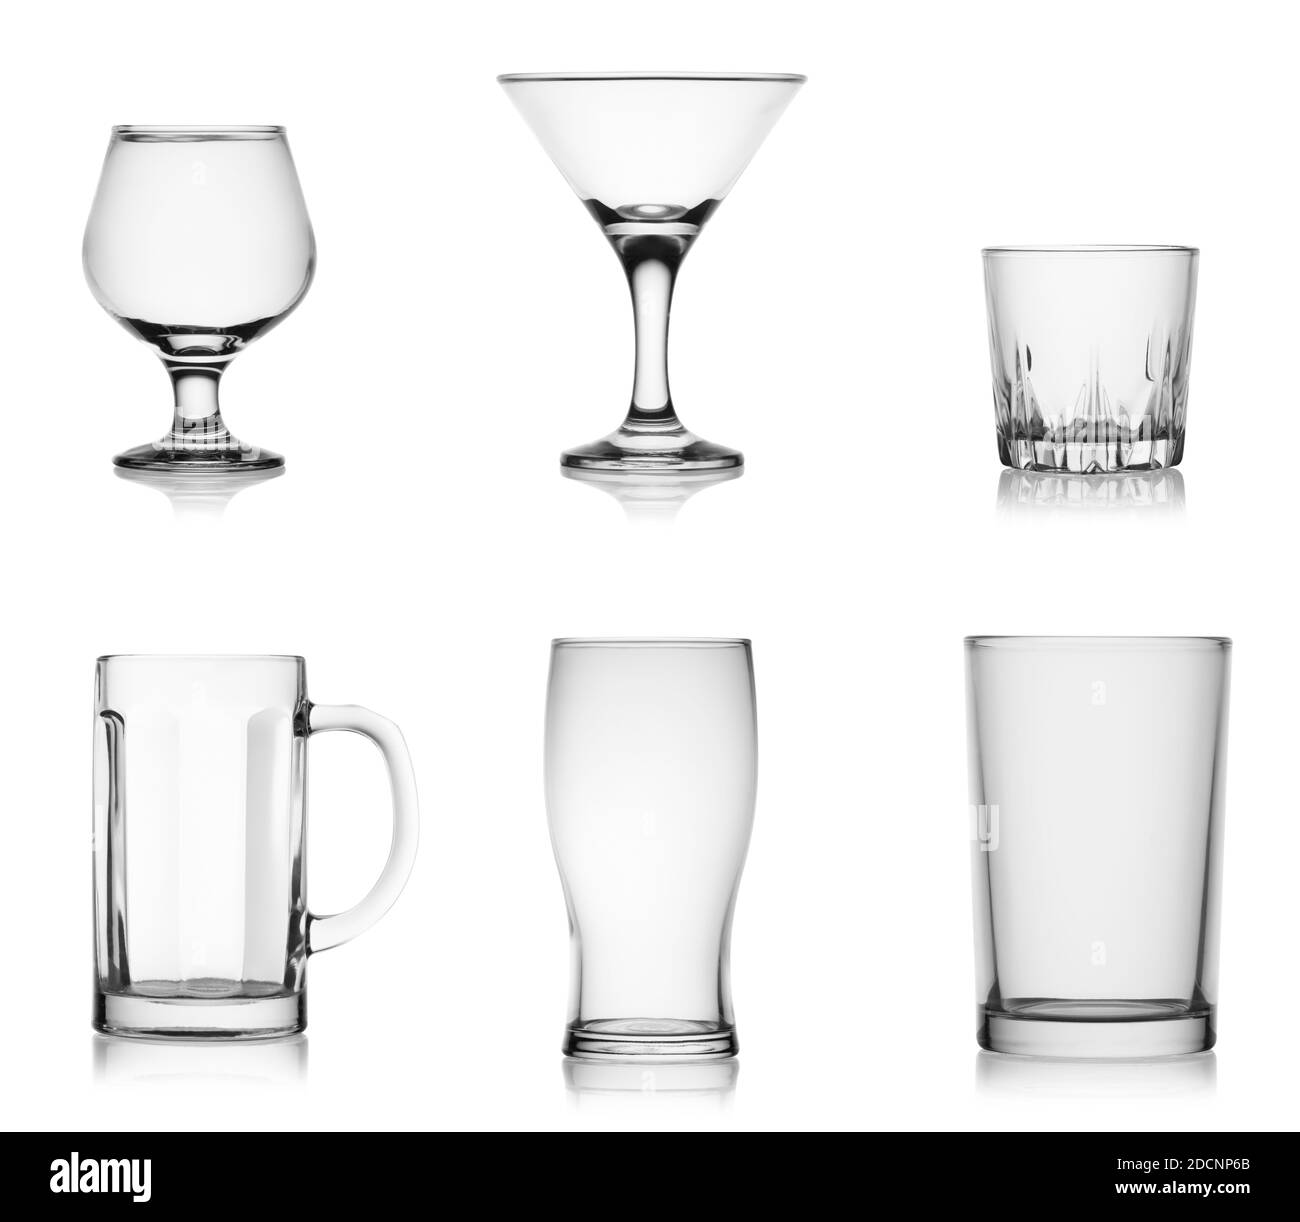 Collectible set of empty glassware glasses isolated on white background. Glasses for various alcoholic beverages. Stock Photo